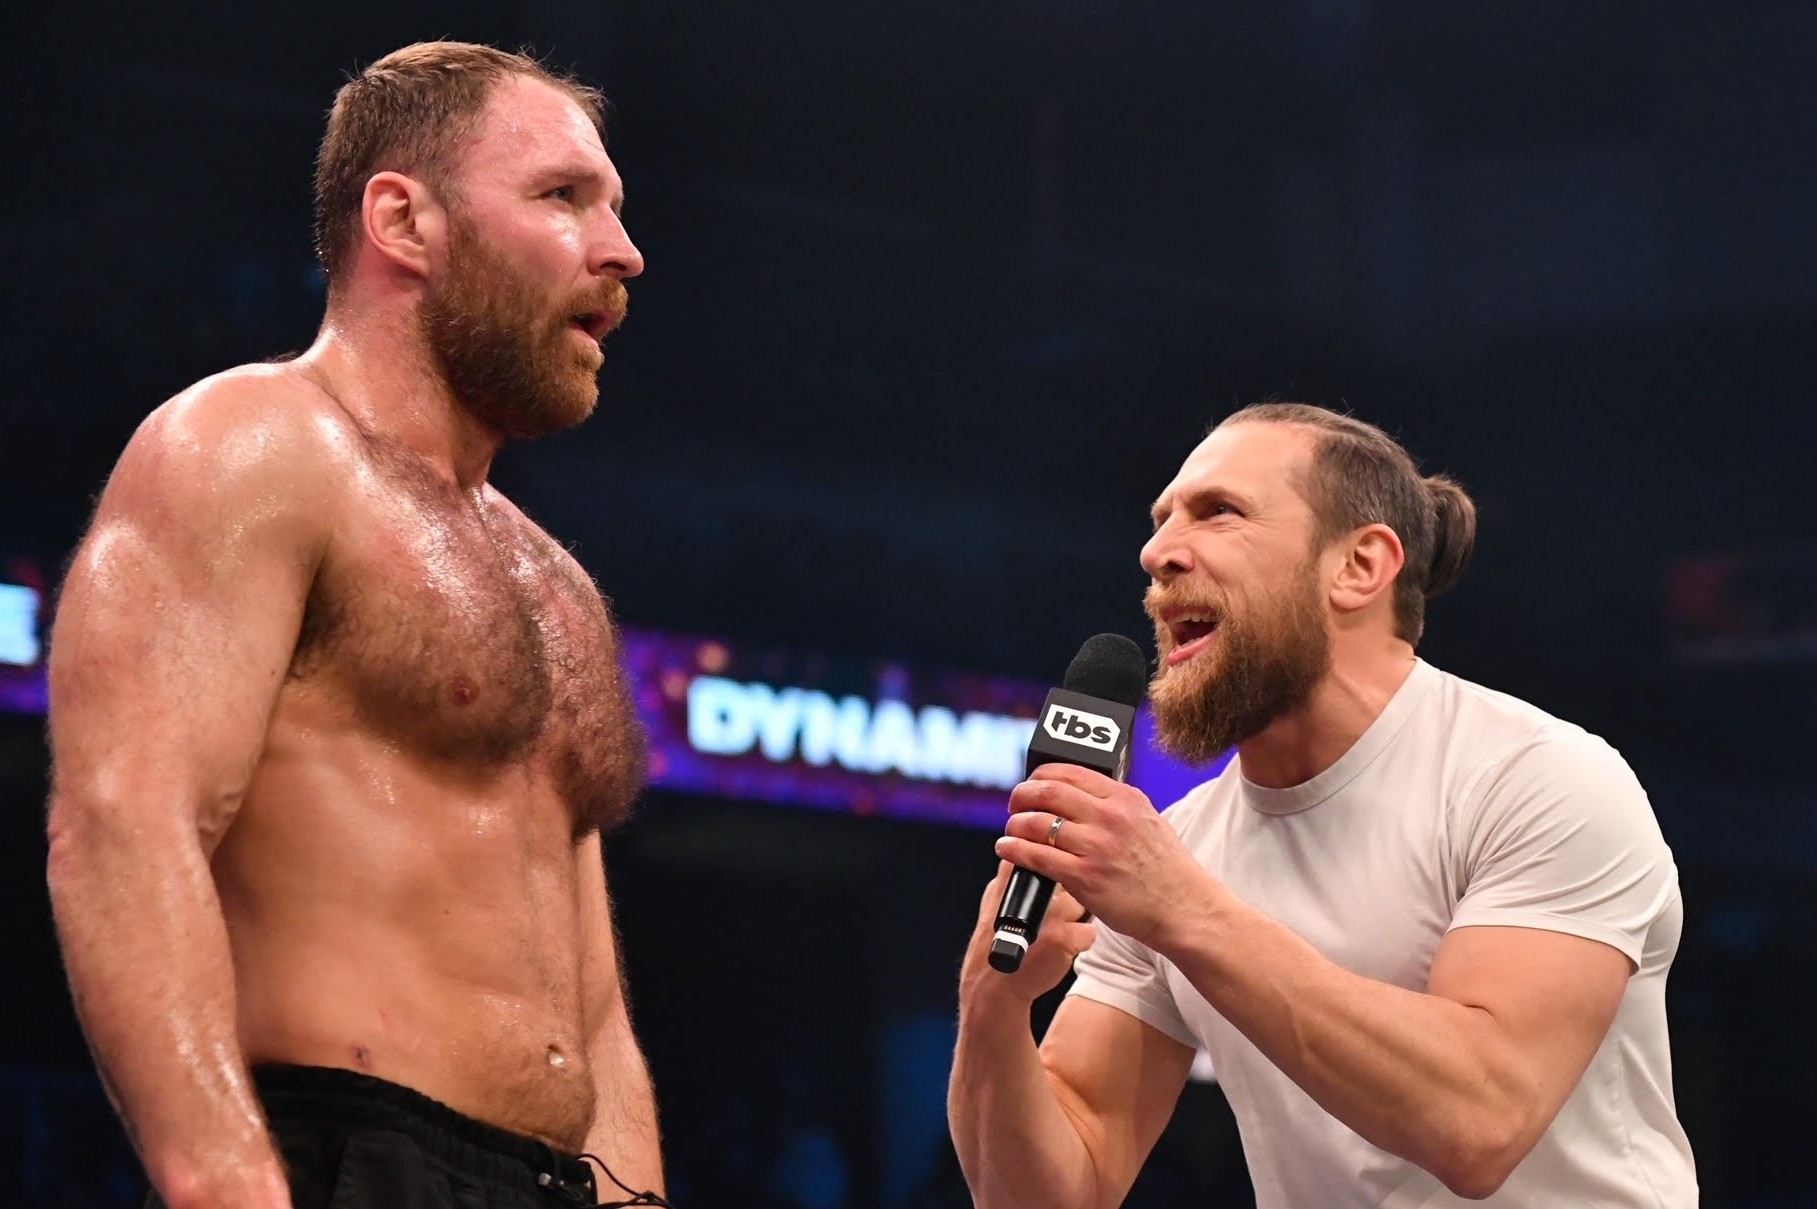 Jon Moxley Reflects on the Difficulty of Imagining a Wrestling World Without Bryan Danielson